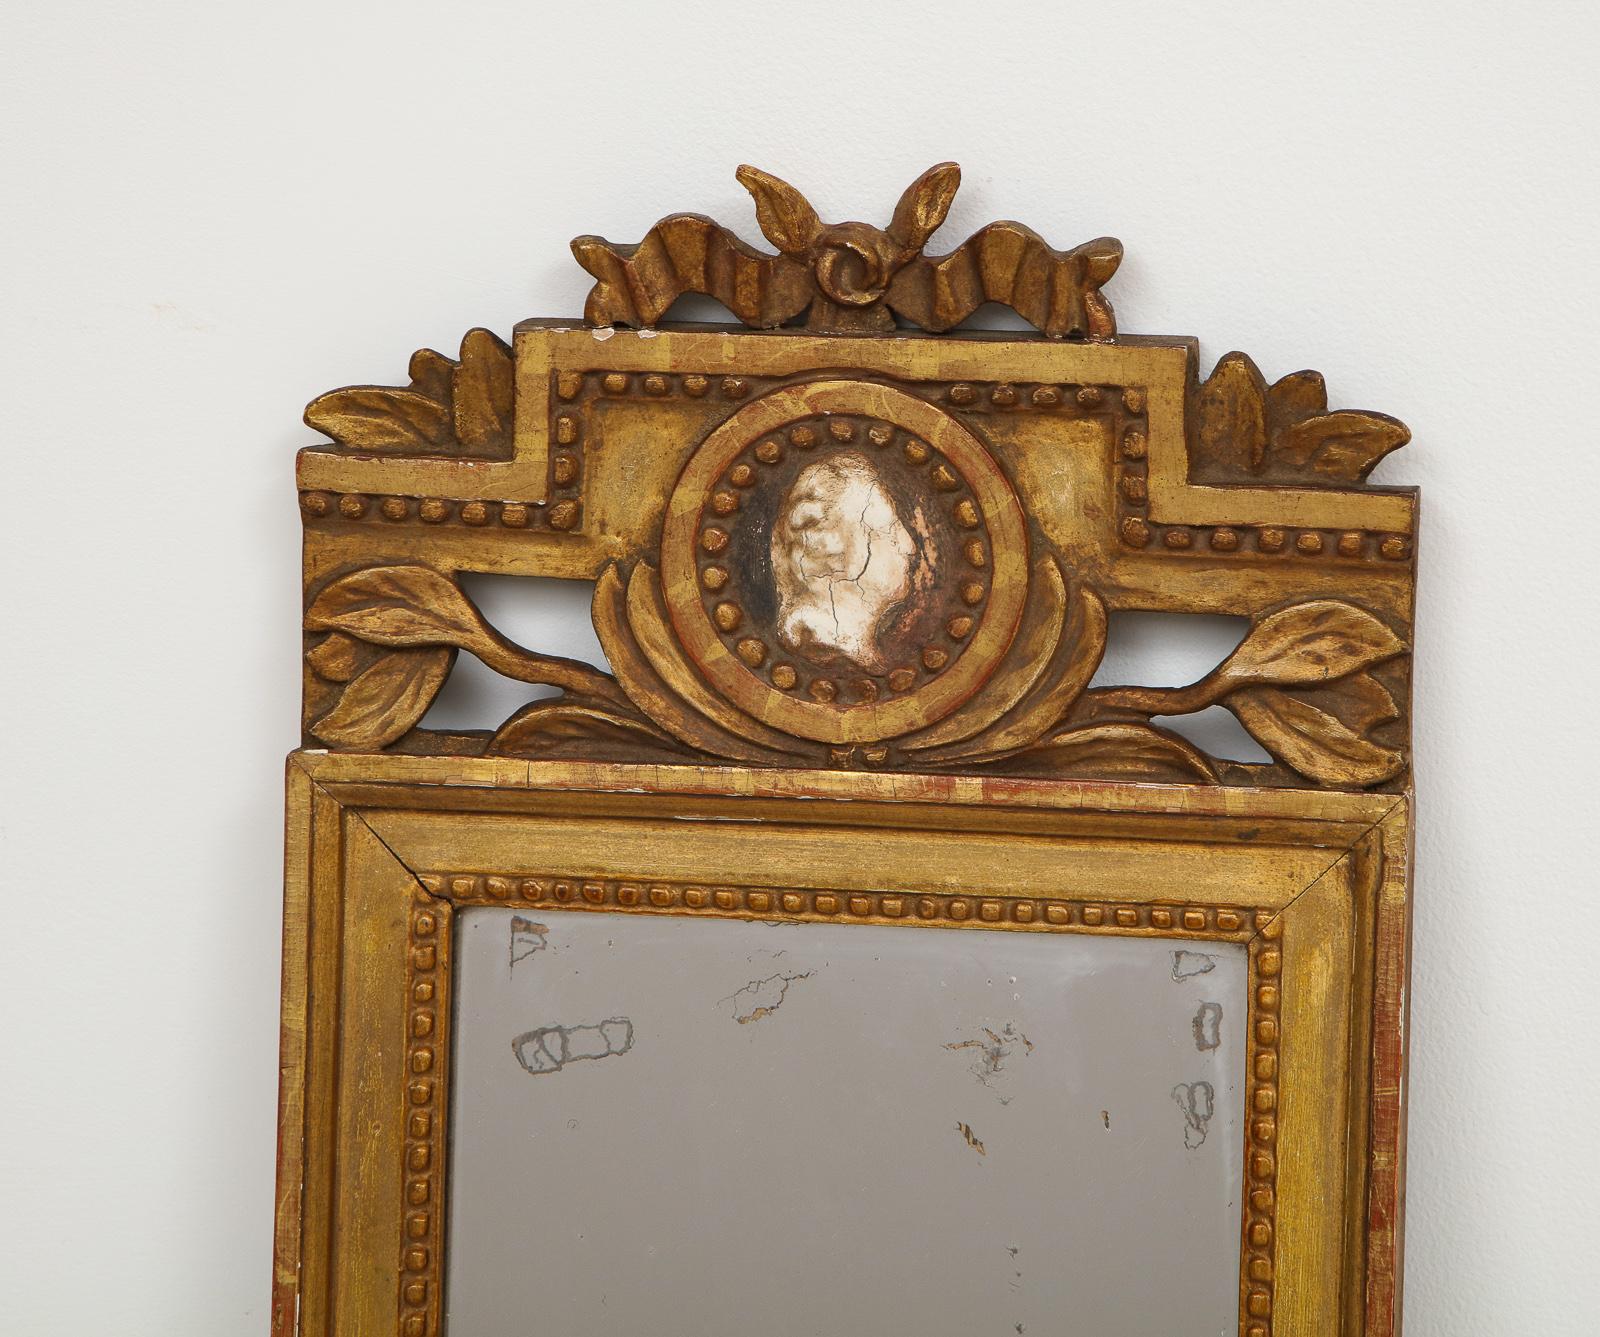 18th century Swedish Gustavian single arm candle sconce mirror with center cameo, origin: Sweden, circa 1780

In Scandinavia, candlelight is an important element found in any interior (or exterior) in everyday life. The desire to capture light stems